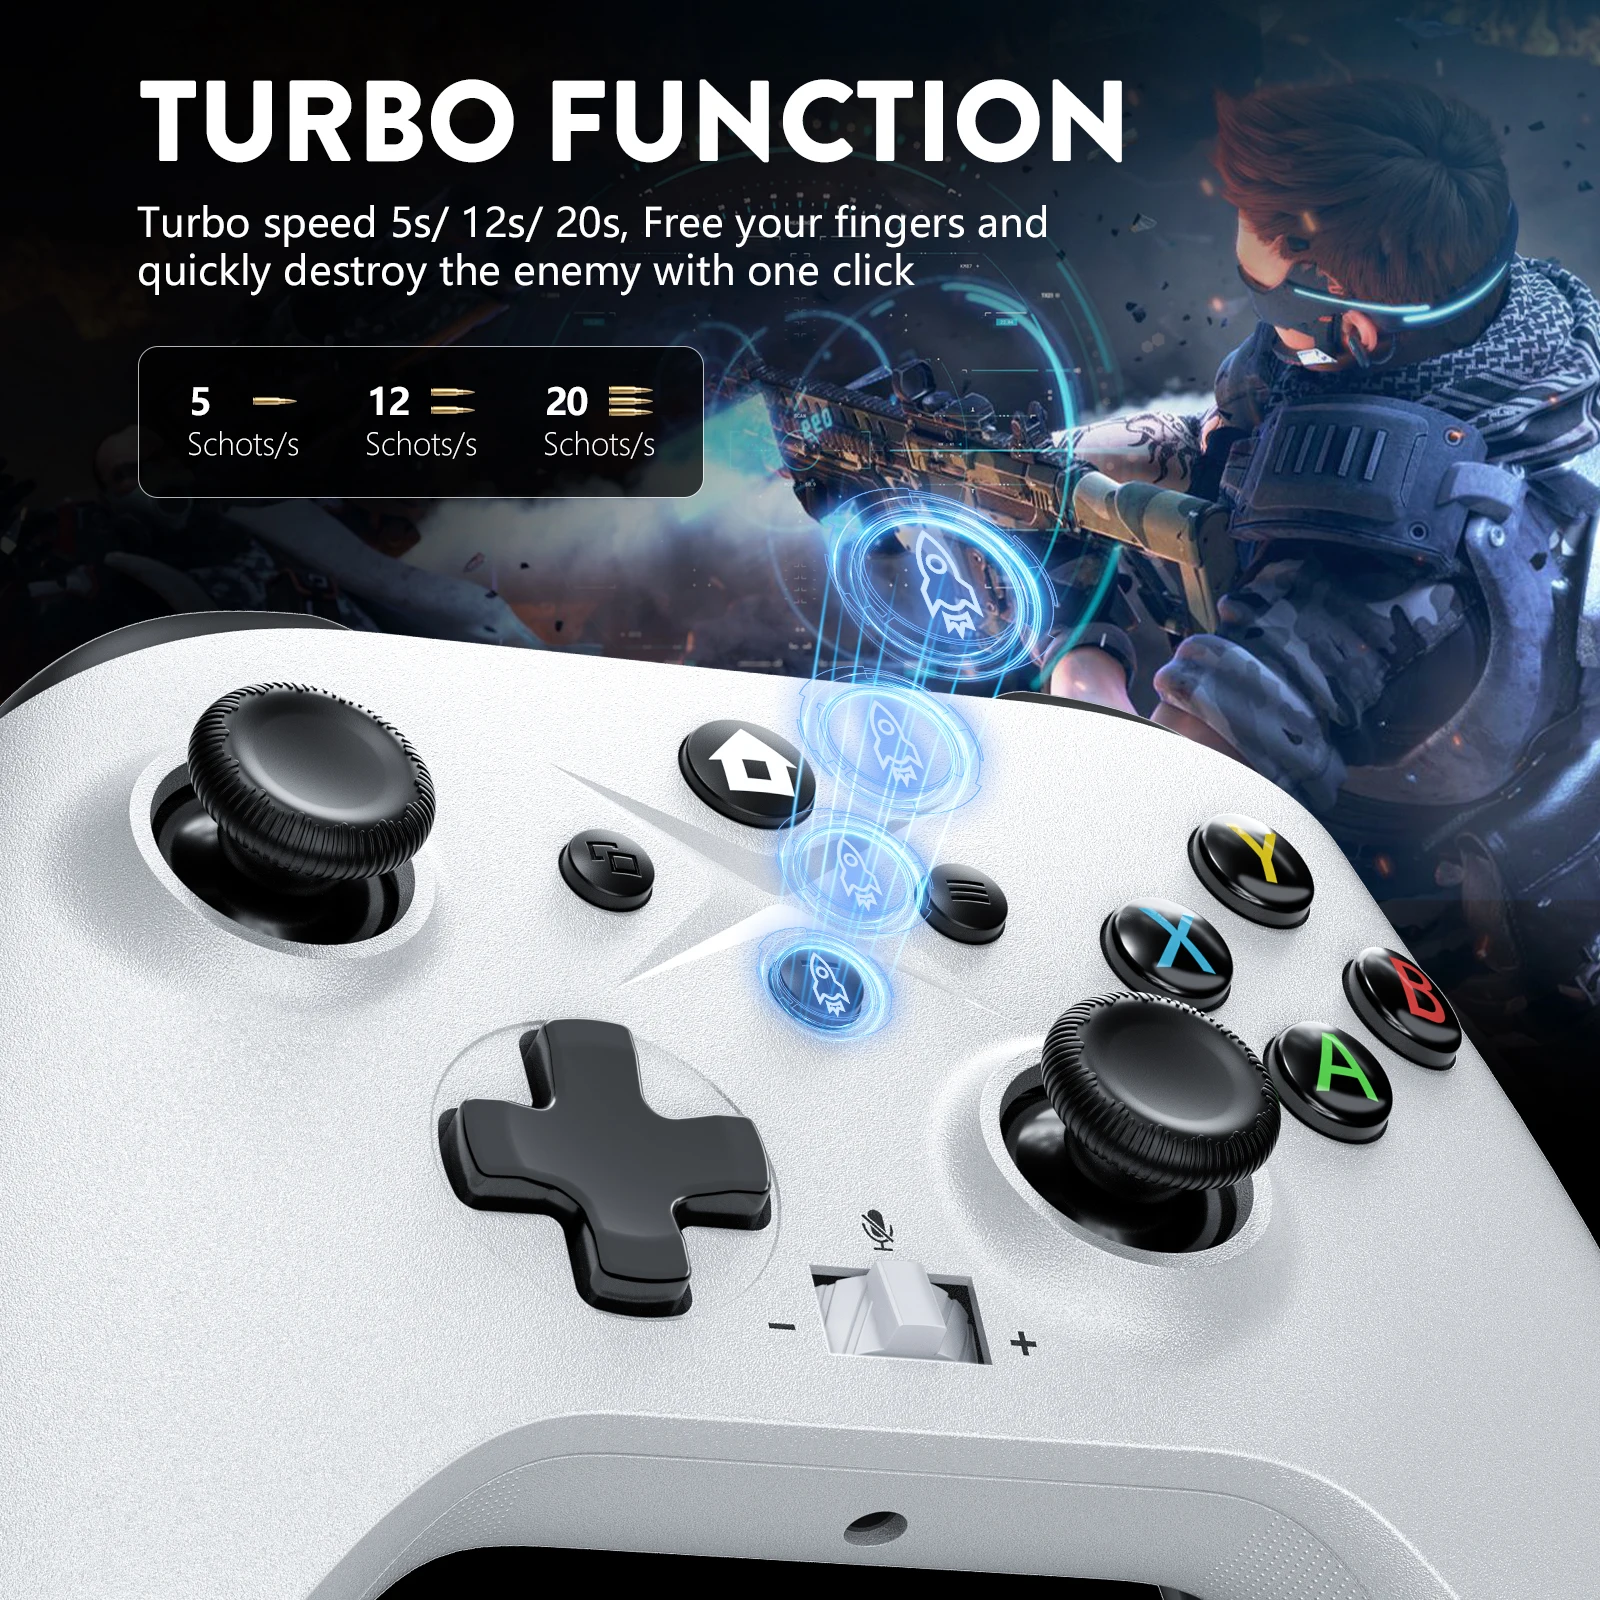 Ultimate Wireless Gamepad for Xbox Series X/S & PC